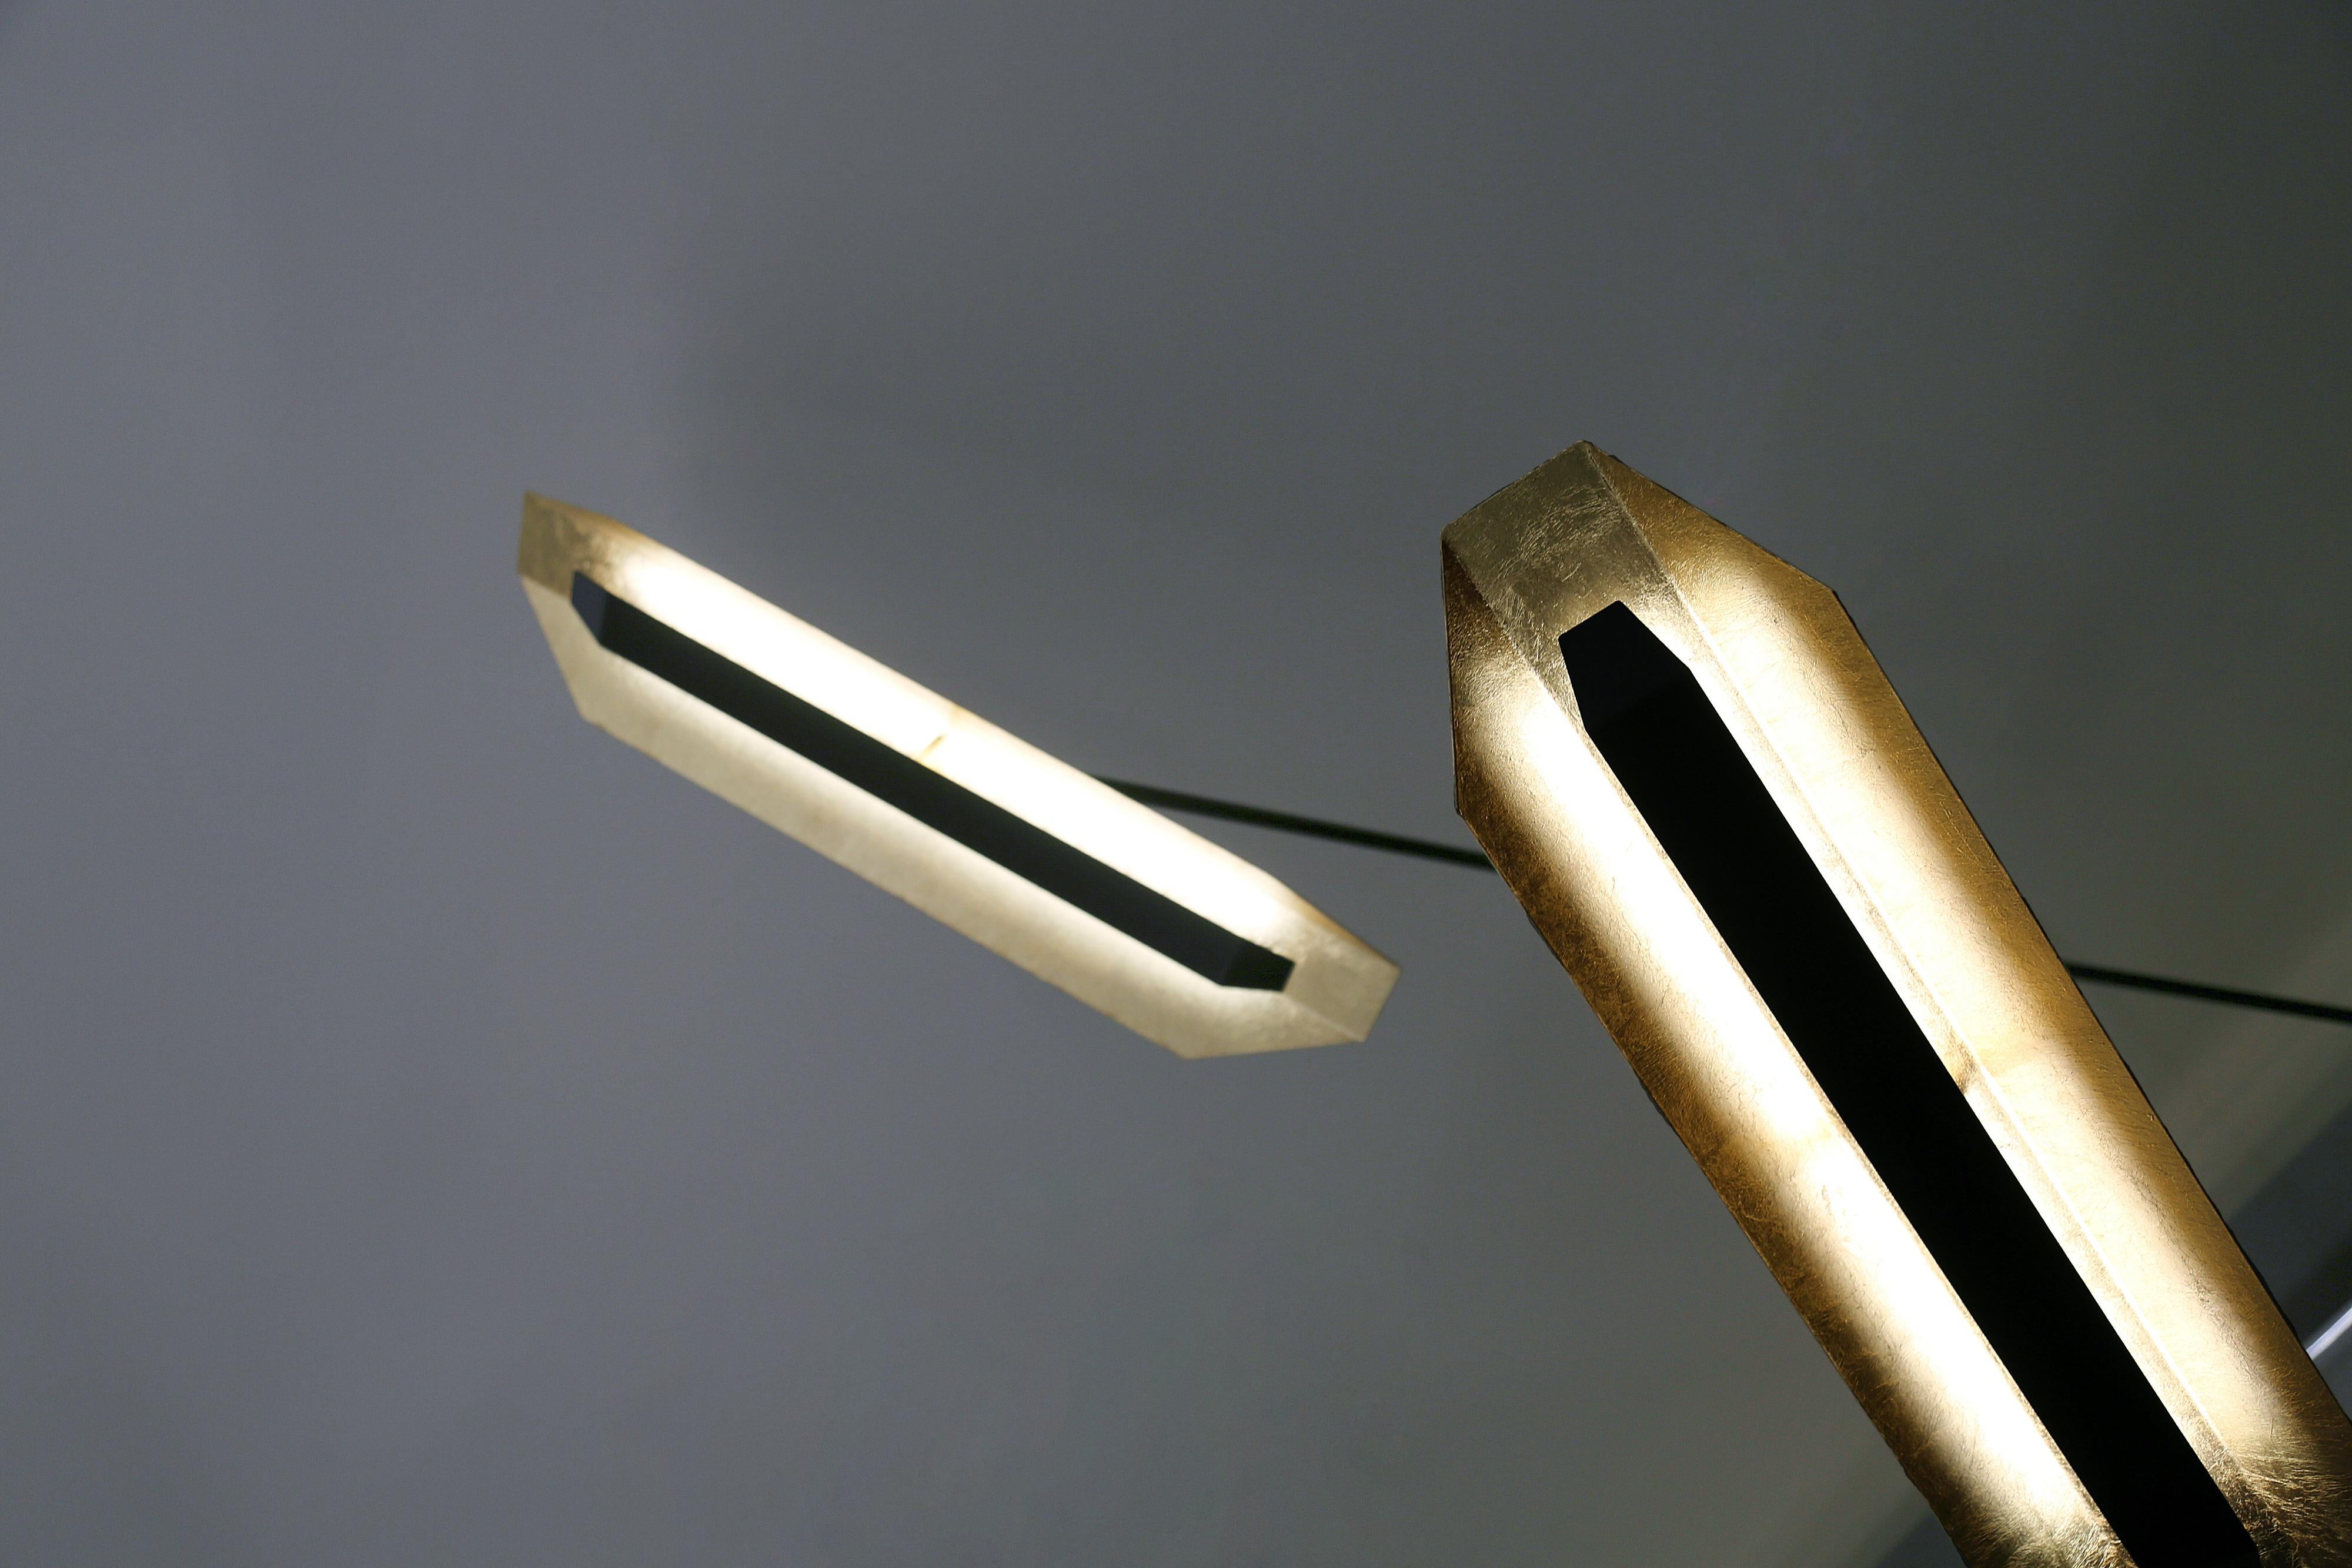 Satellite Pendant Light Pendant by William Guillon and Pierre Mounier
Measures: Height Bespoke
Width up to 100 cm (for one arm)
Black painted steel, 24-carat golden leave
Hand sculpted in France

William Guillon:

William Guillon’s main influences